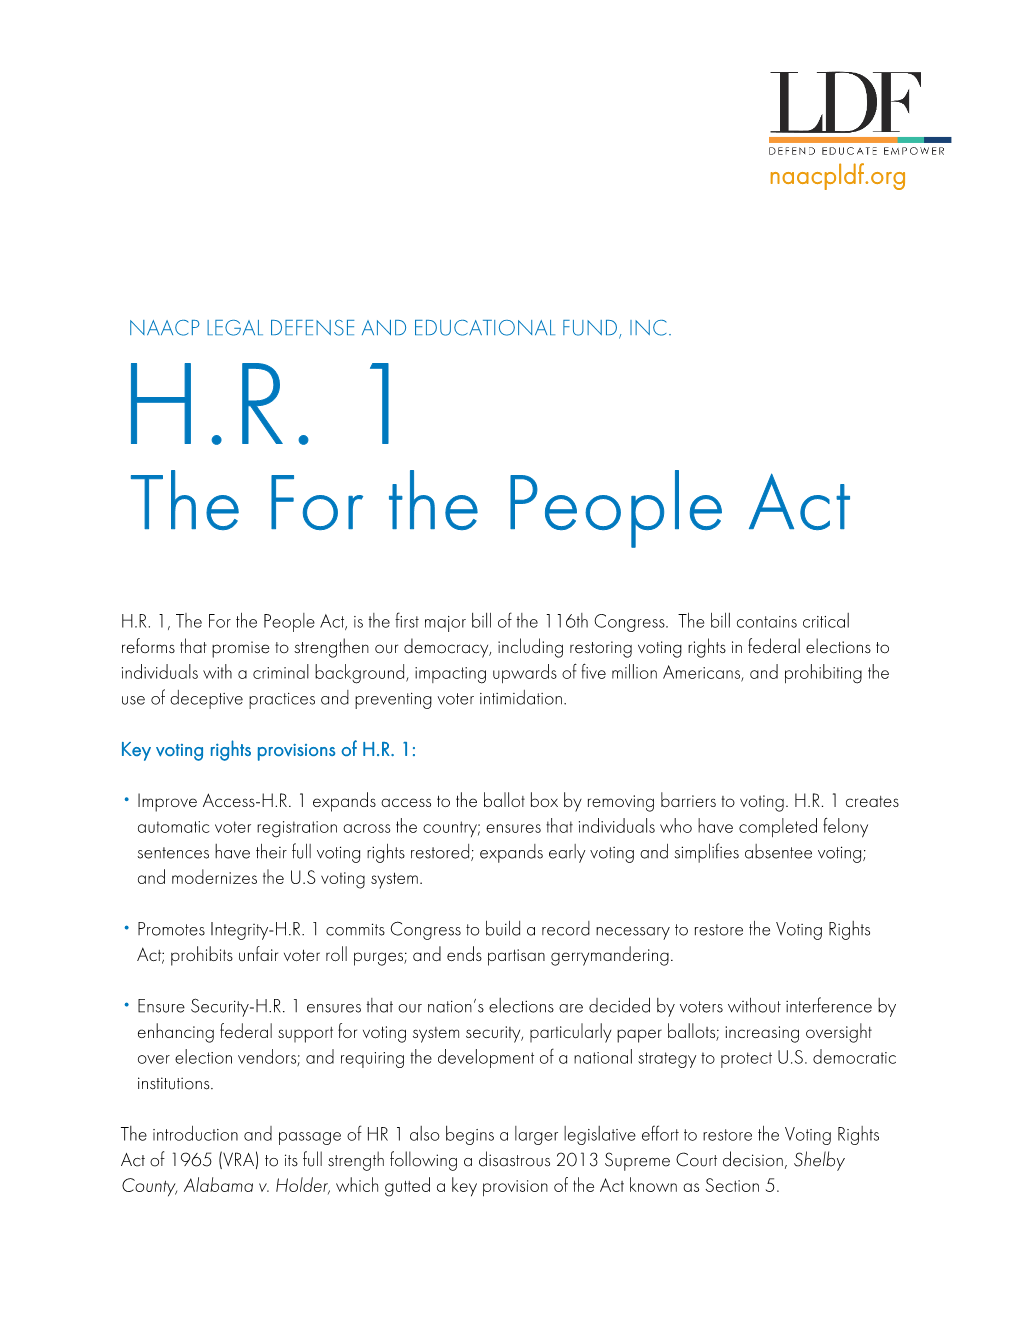 HR 1: the for the People